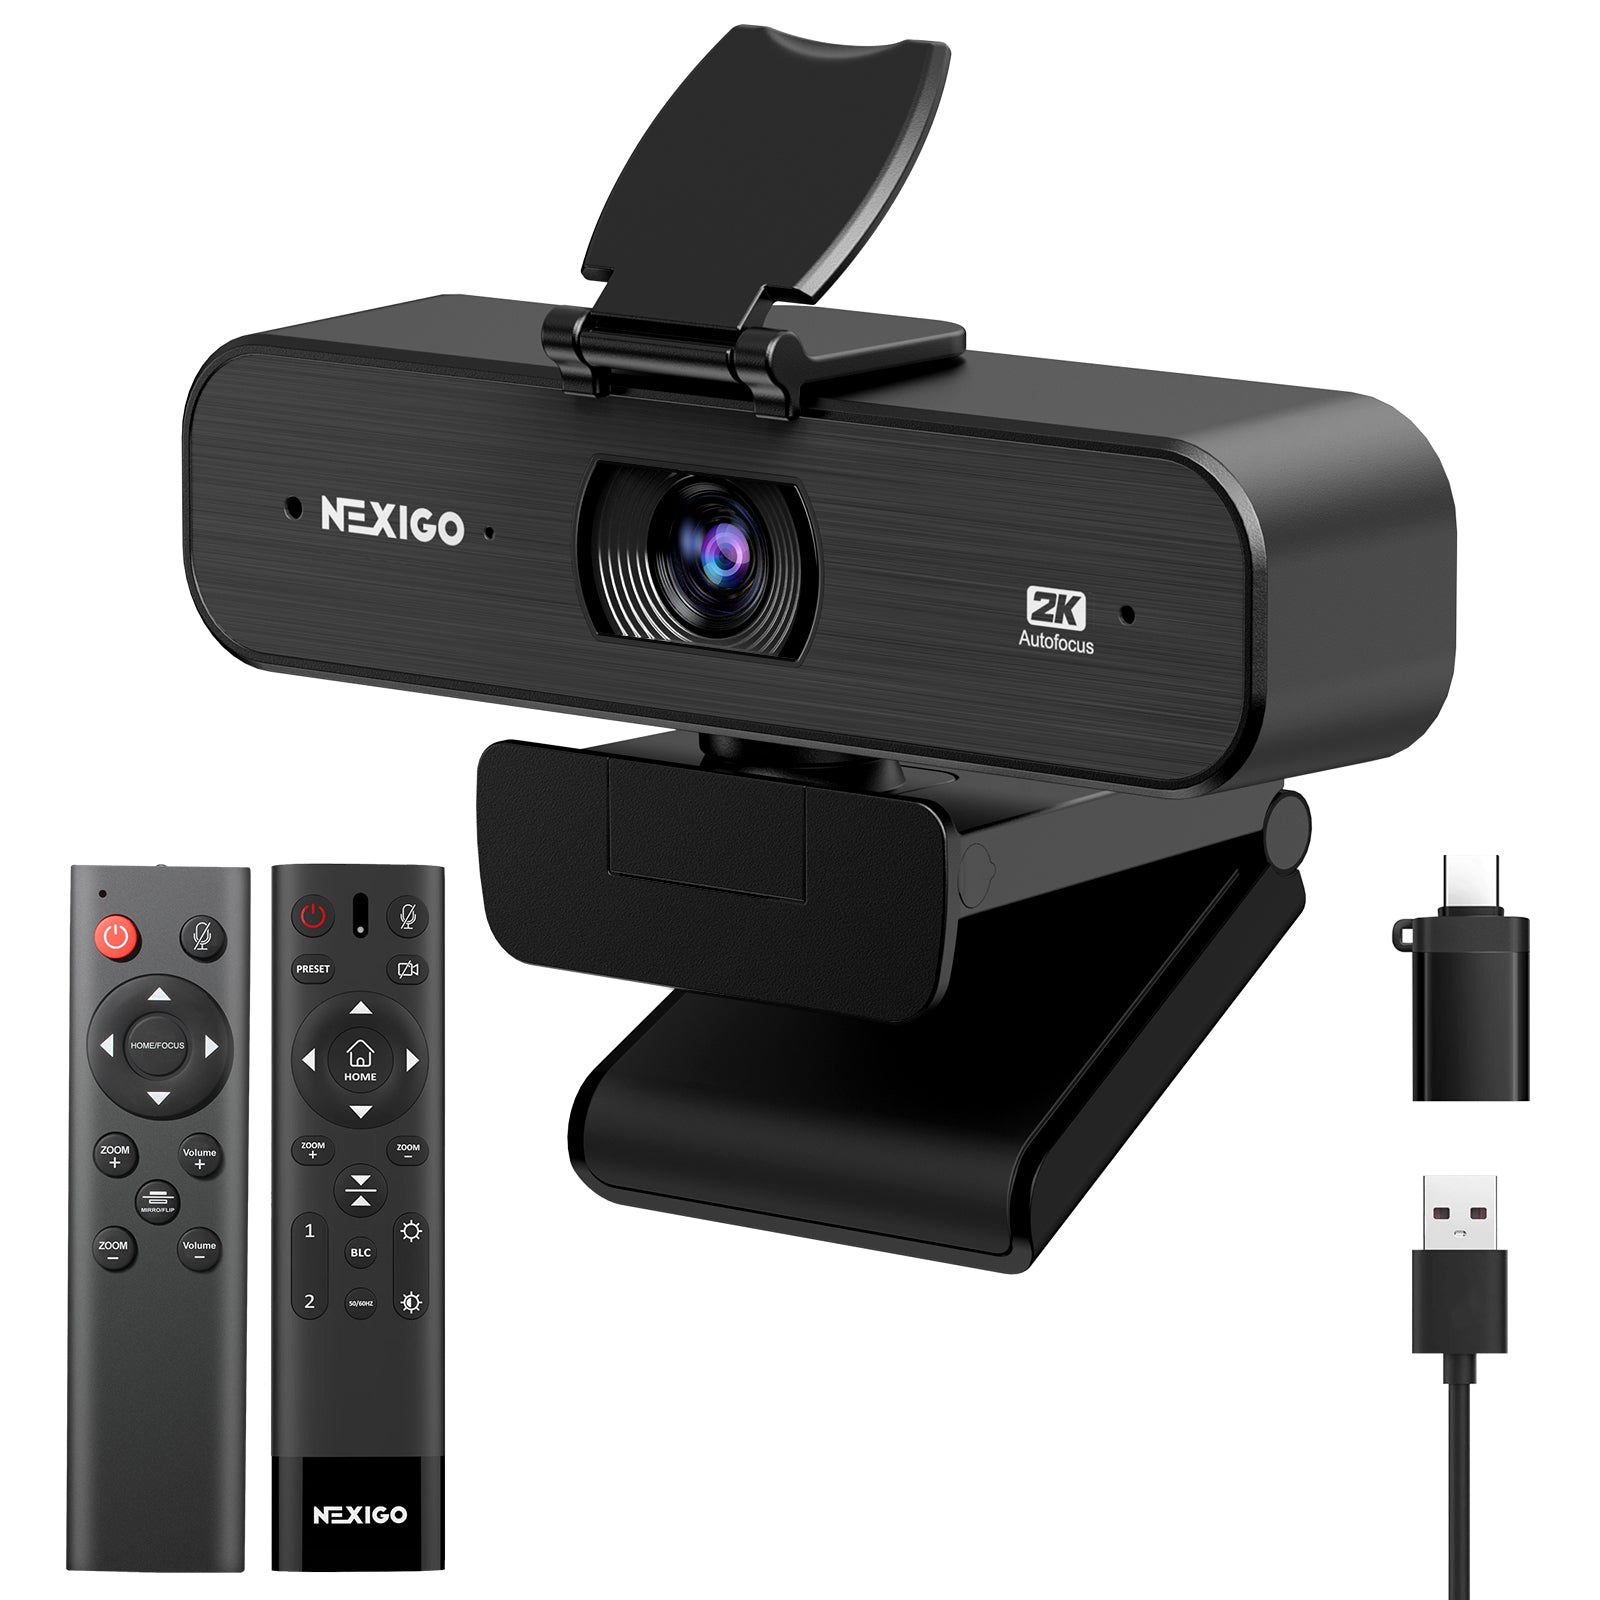 The black NexiGo N940P can be operated with a remote control and comes with a C to A adapter.